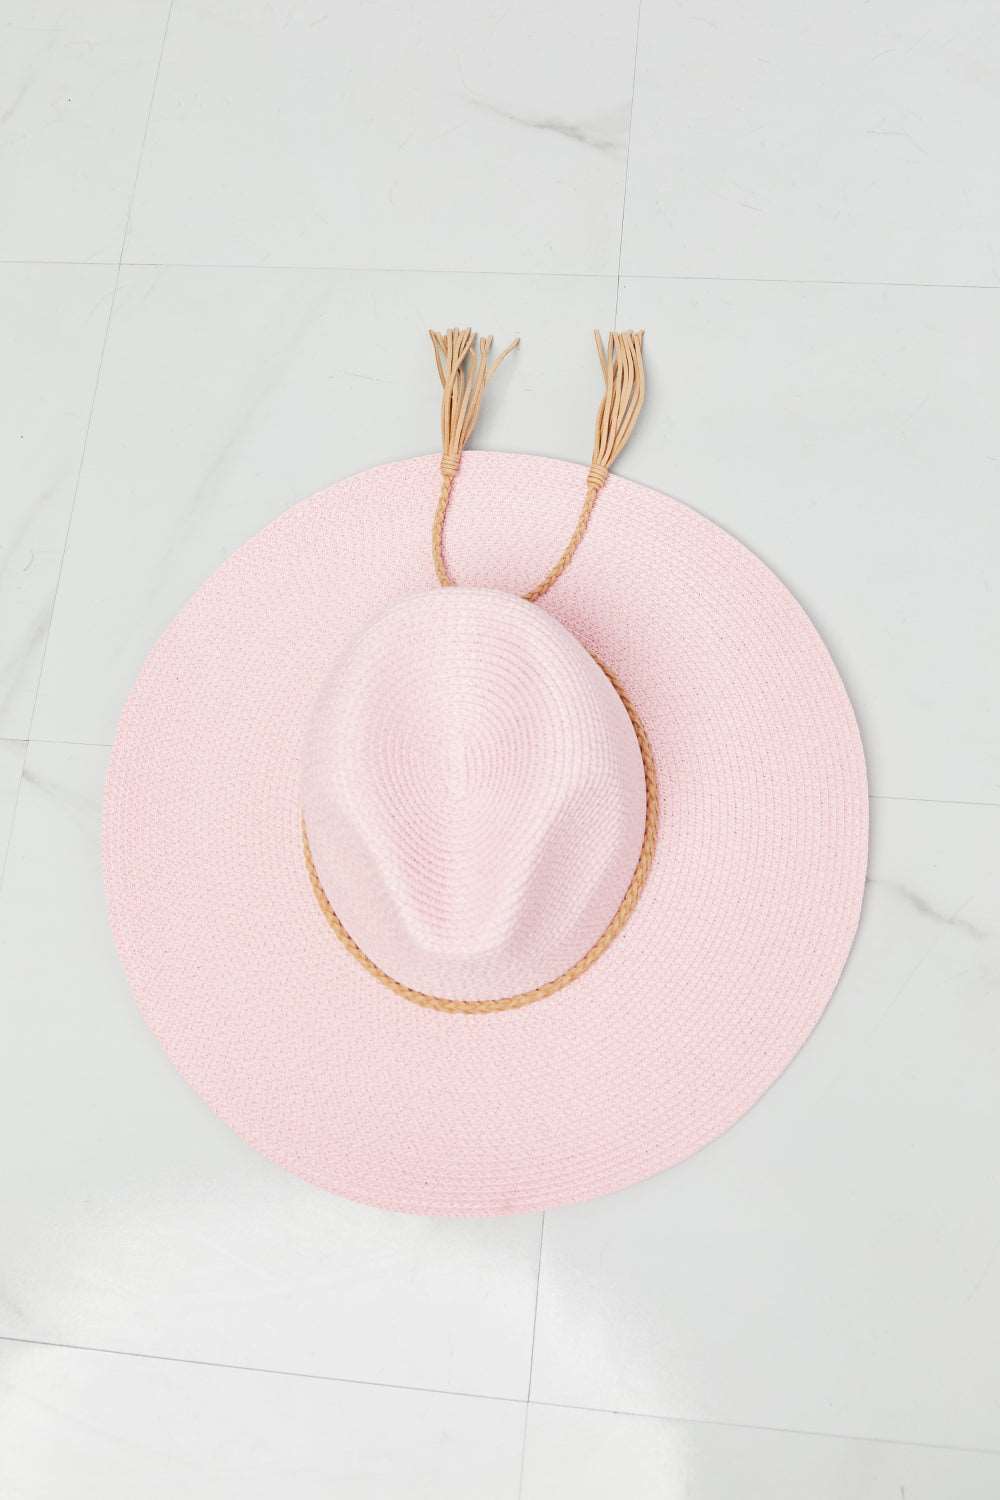 Fame - Women's Route To Paradise Straw Hat